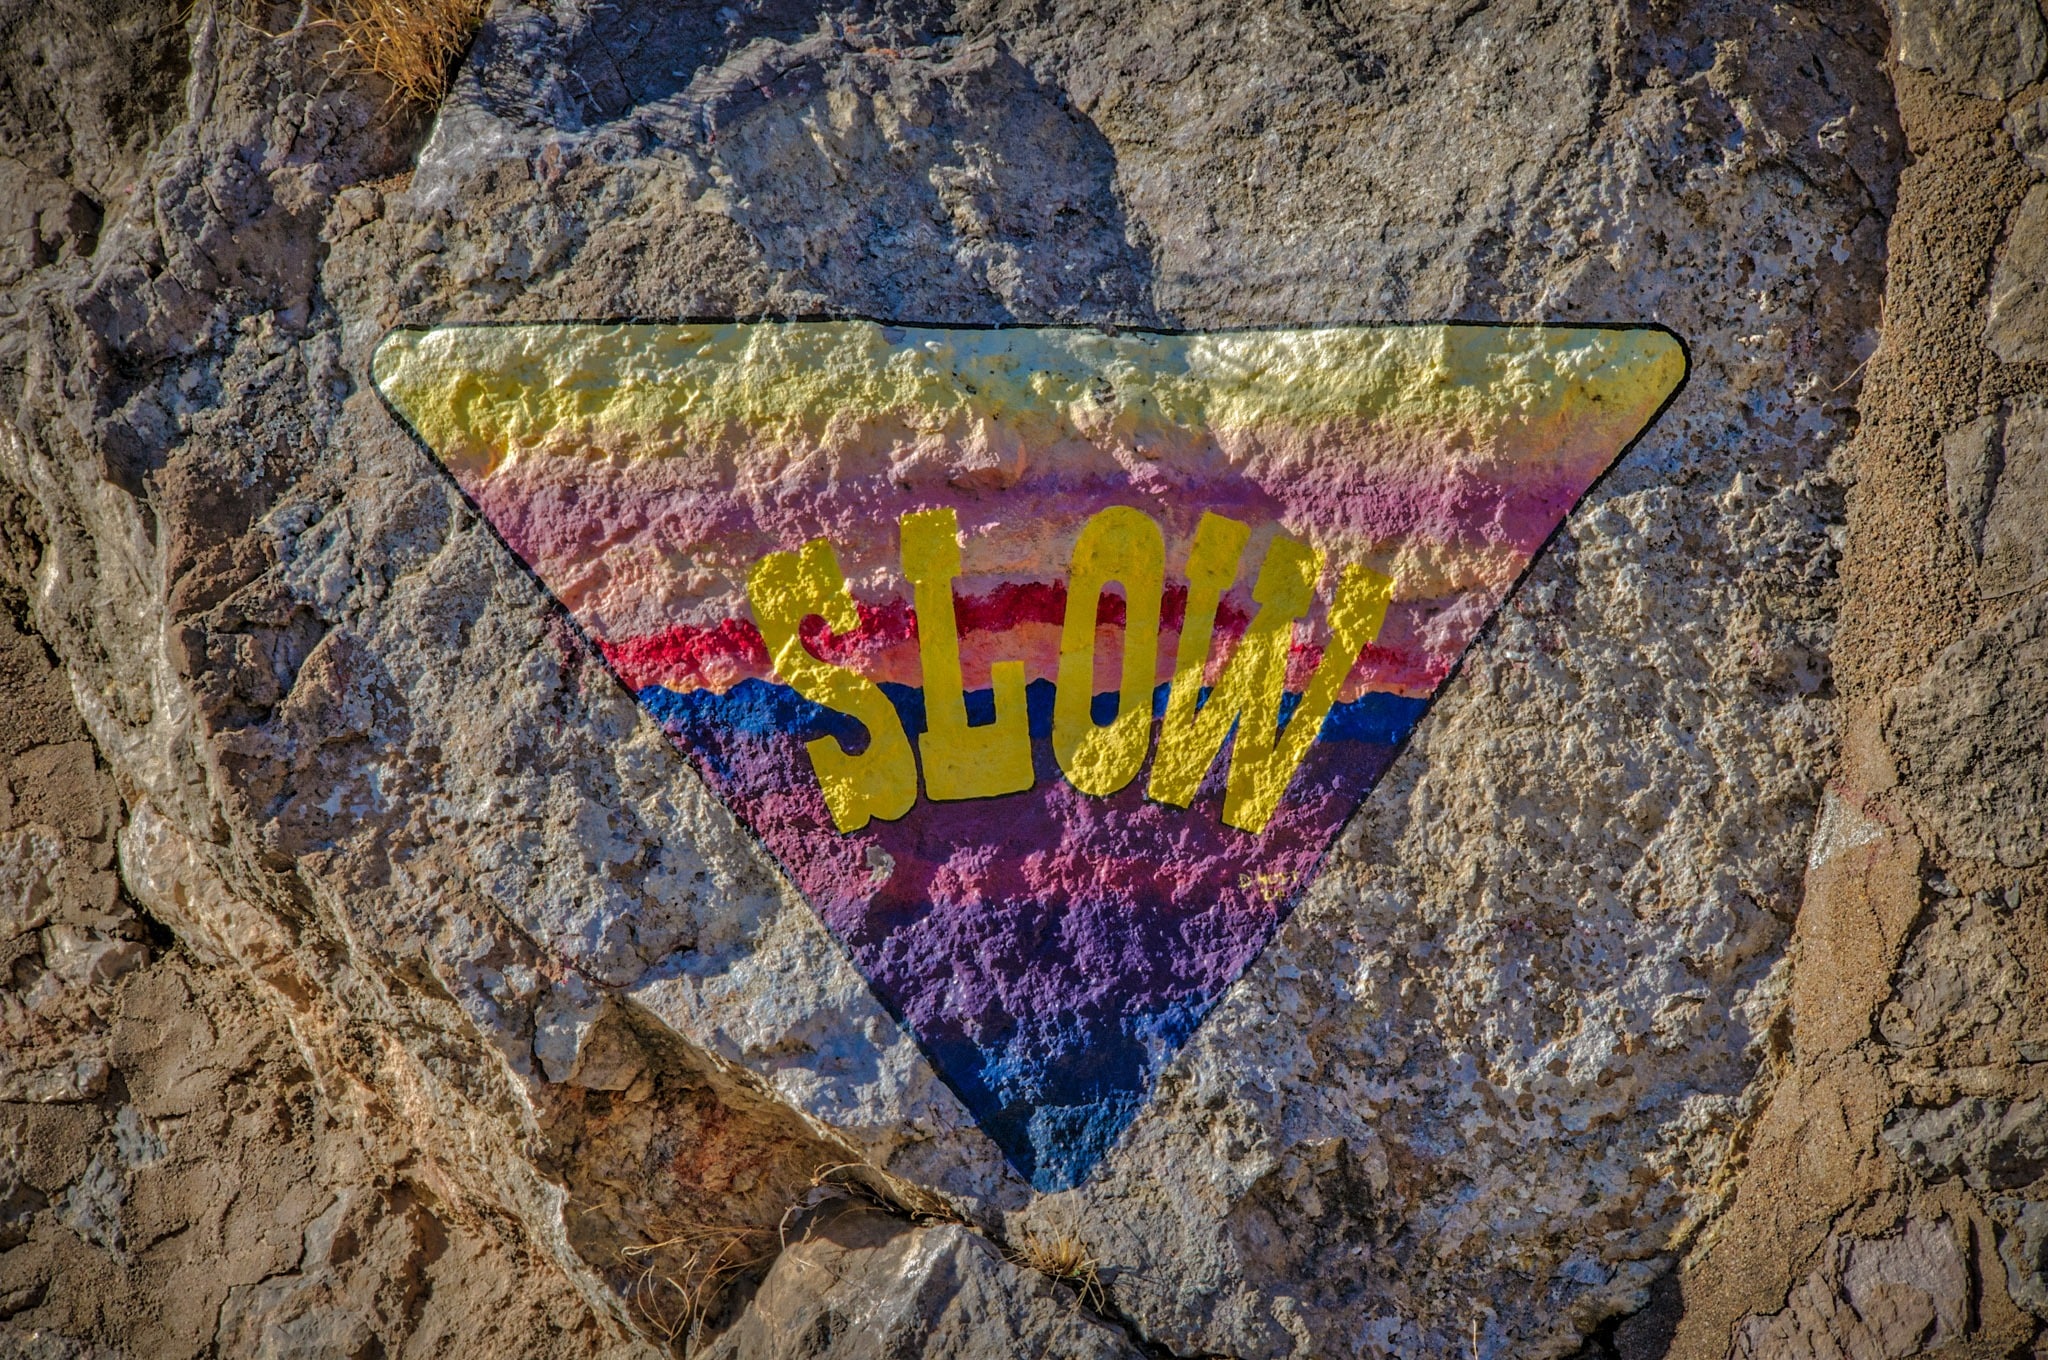 This rainbow-hued SLOW sign is painted on a stone traffic island next to Tombstone Canyon Road in Bisbee, Arizona.